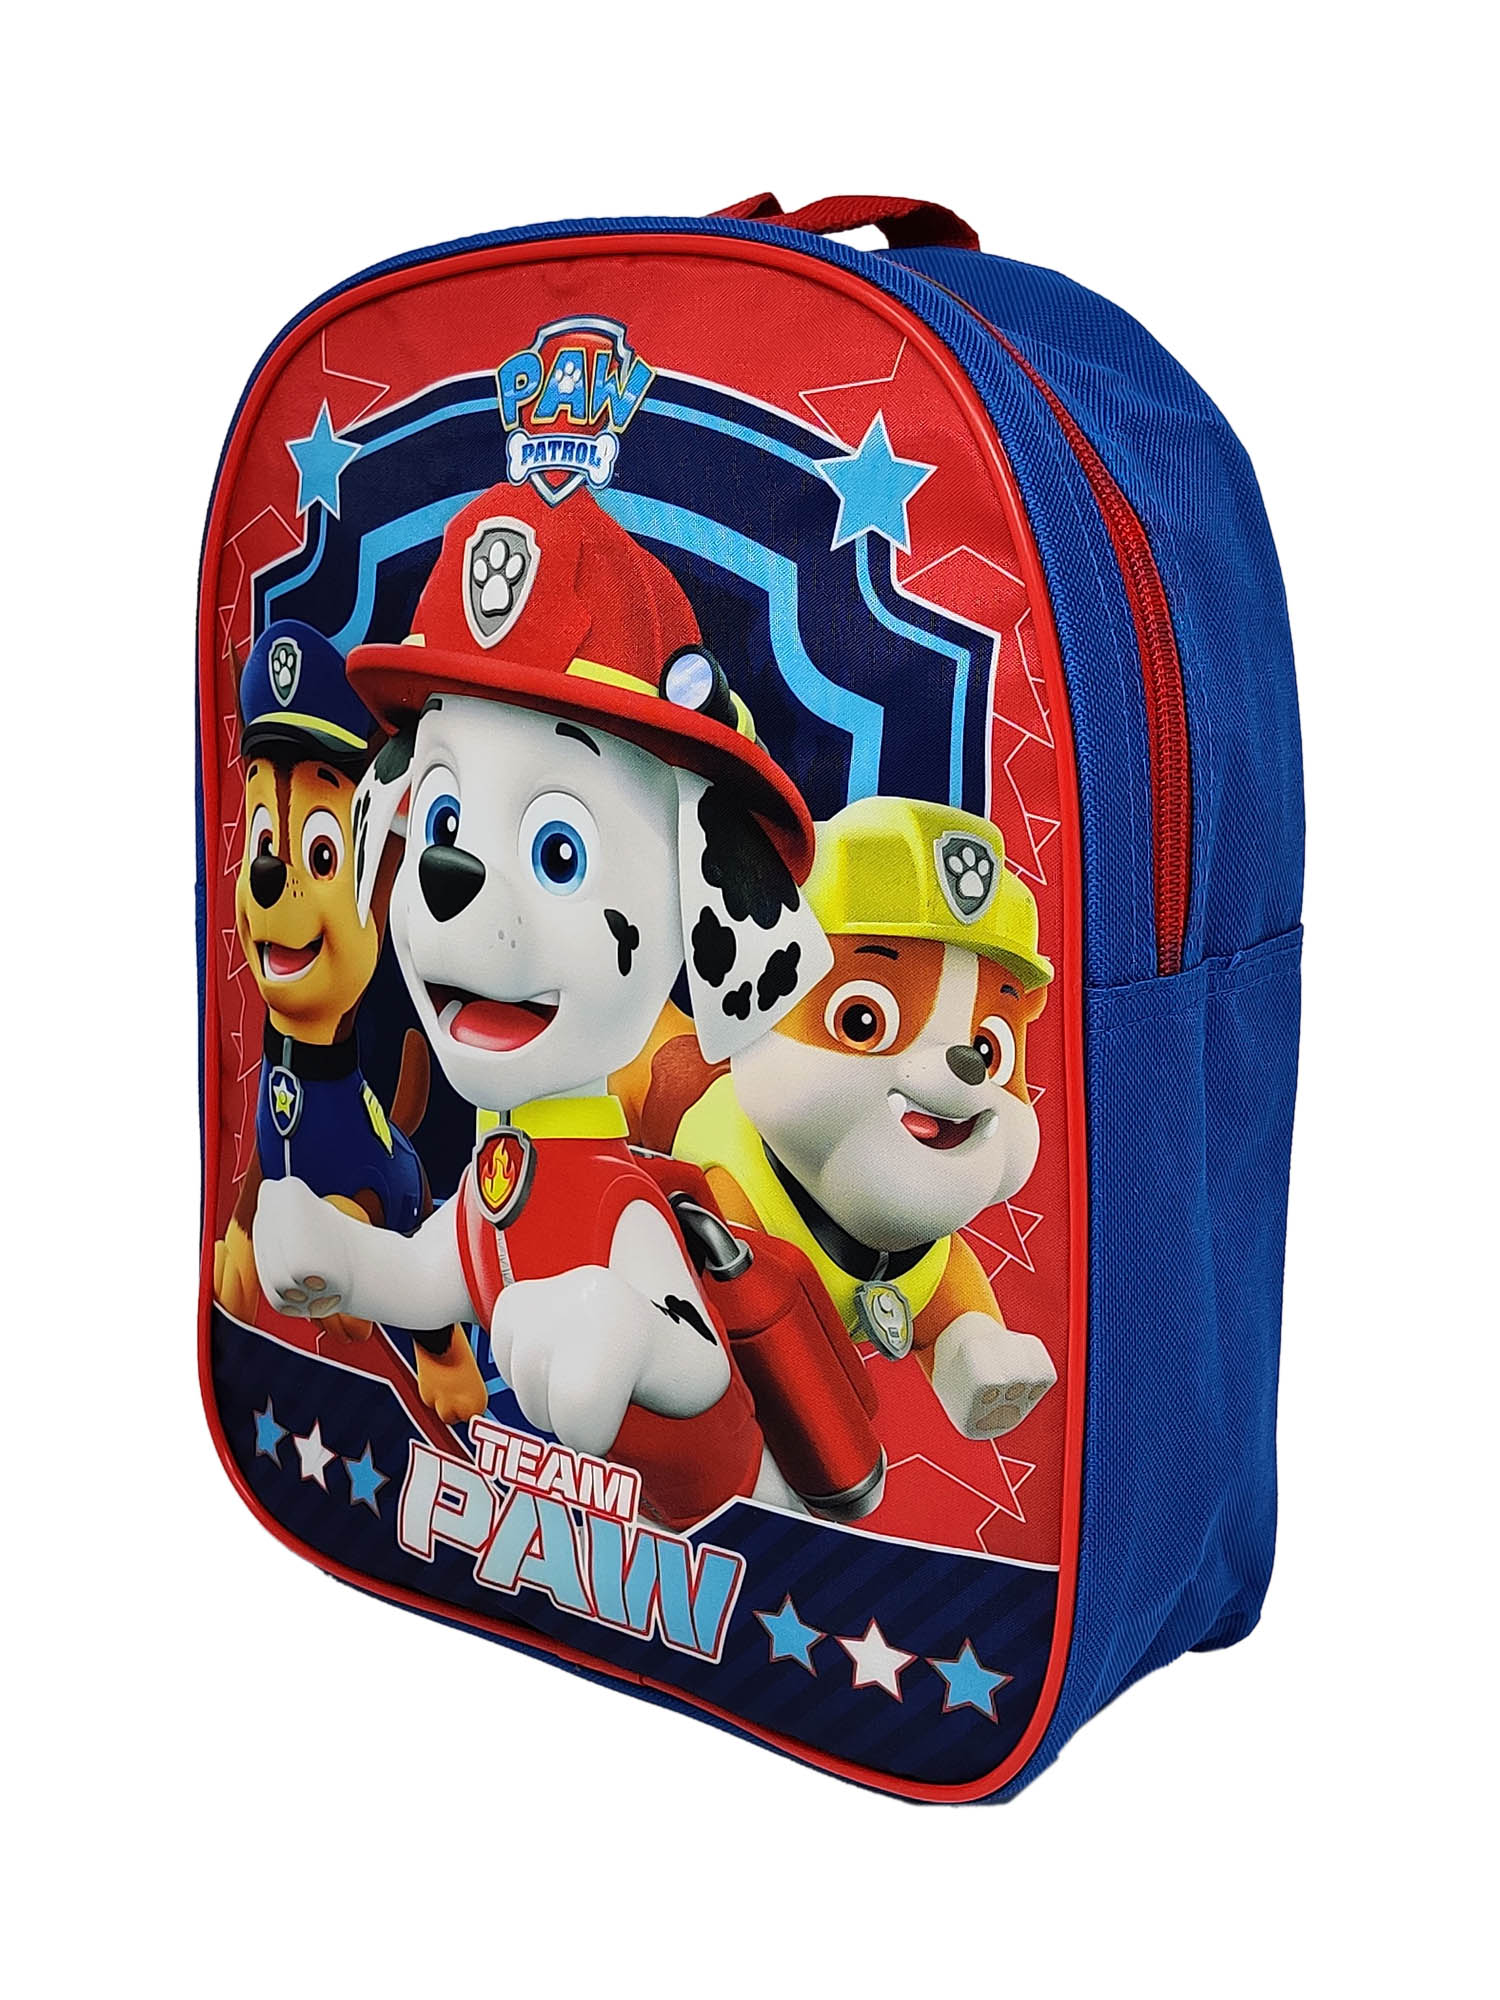 Paw Patrol Backpack 12" Mini Toddler Marshall Chase Rubble Boys Blue Red - image 2 of 3